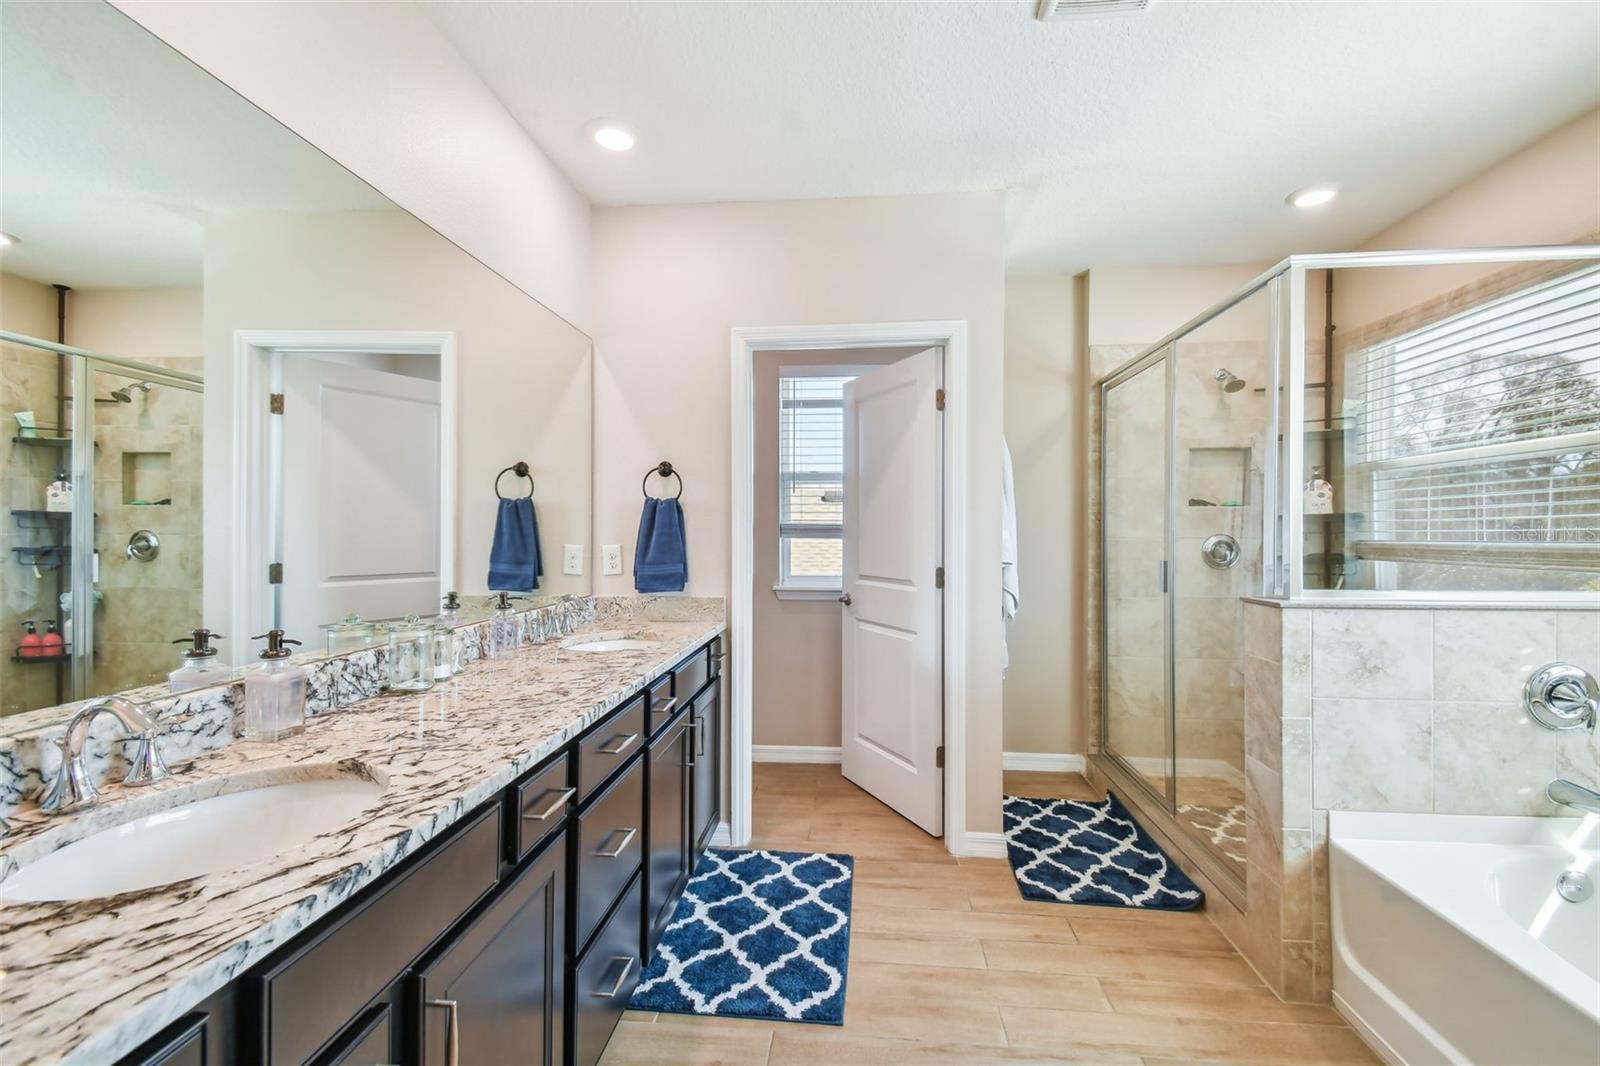 Master bath with his/hers closets, dual sinks, garden tub & separate shower